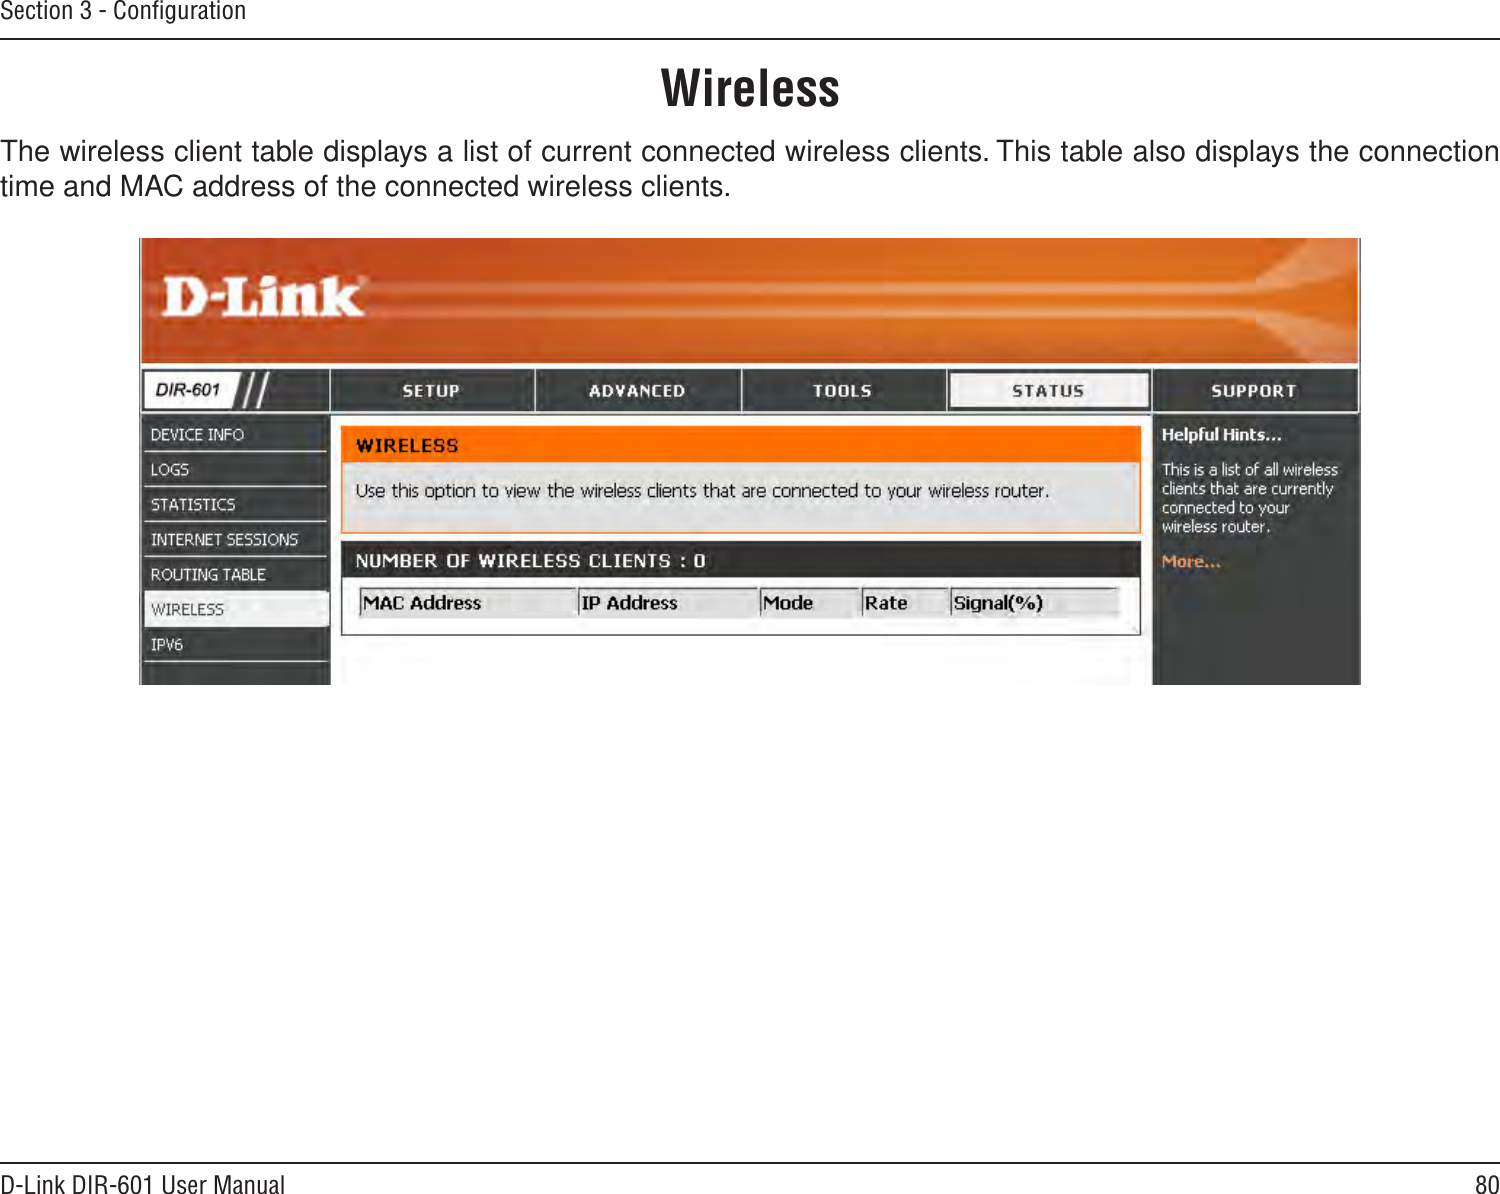 80D-Link DIR-601 User ManualSection 3 - ConﬁgurationThe wireless client table displays a list of current connected wireless clients. This table also displays the connection time and MAC address of the connected wireless clients.Wireless